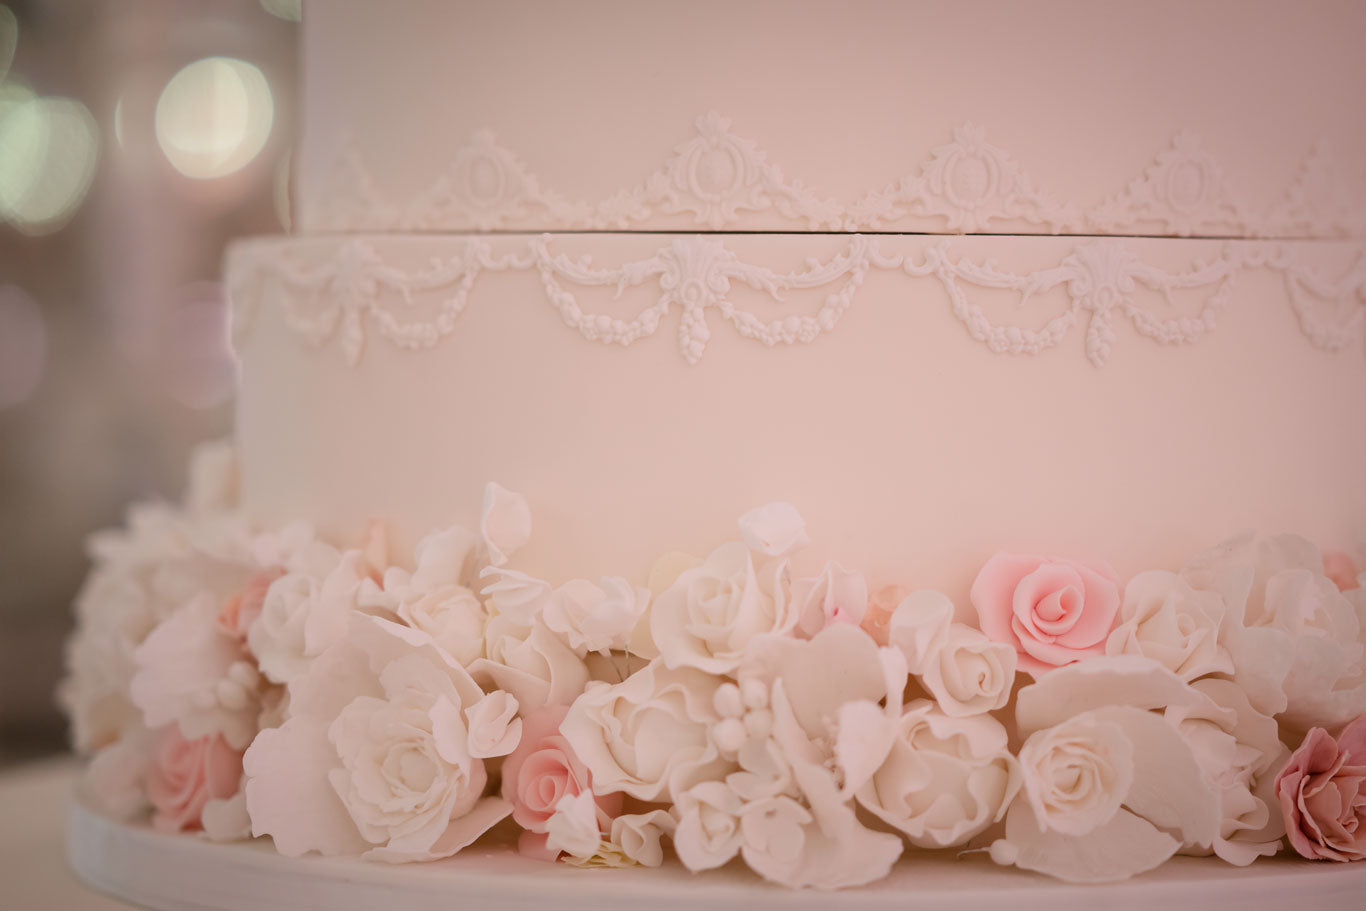 pale pink wedding cake detailed with white and pink icing flowers round the base